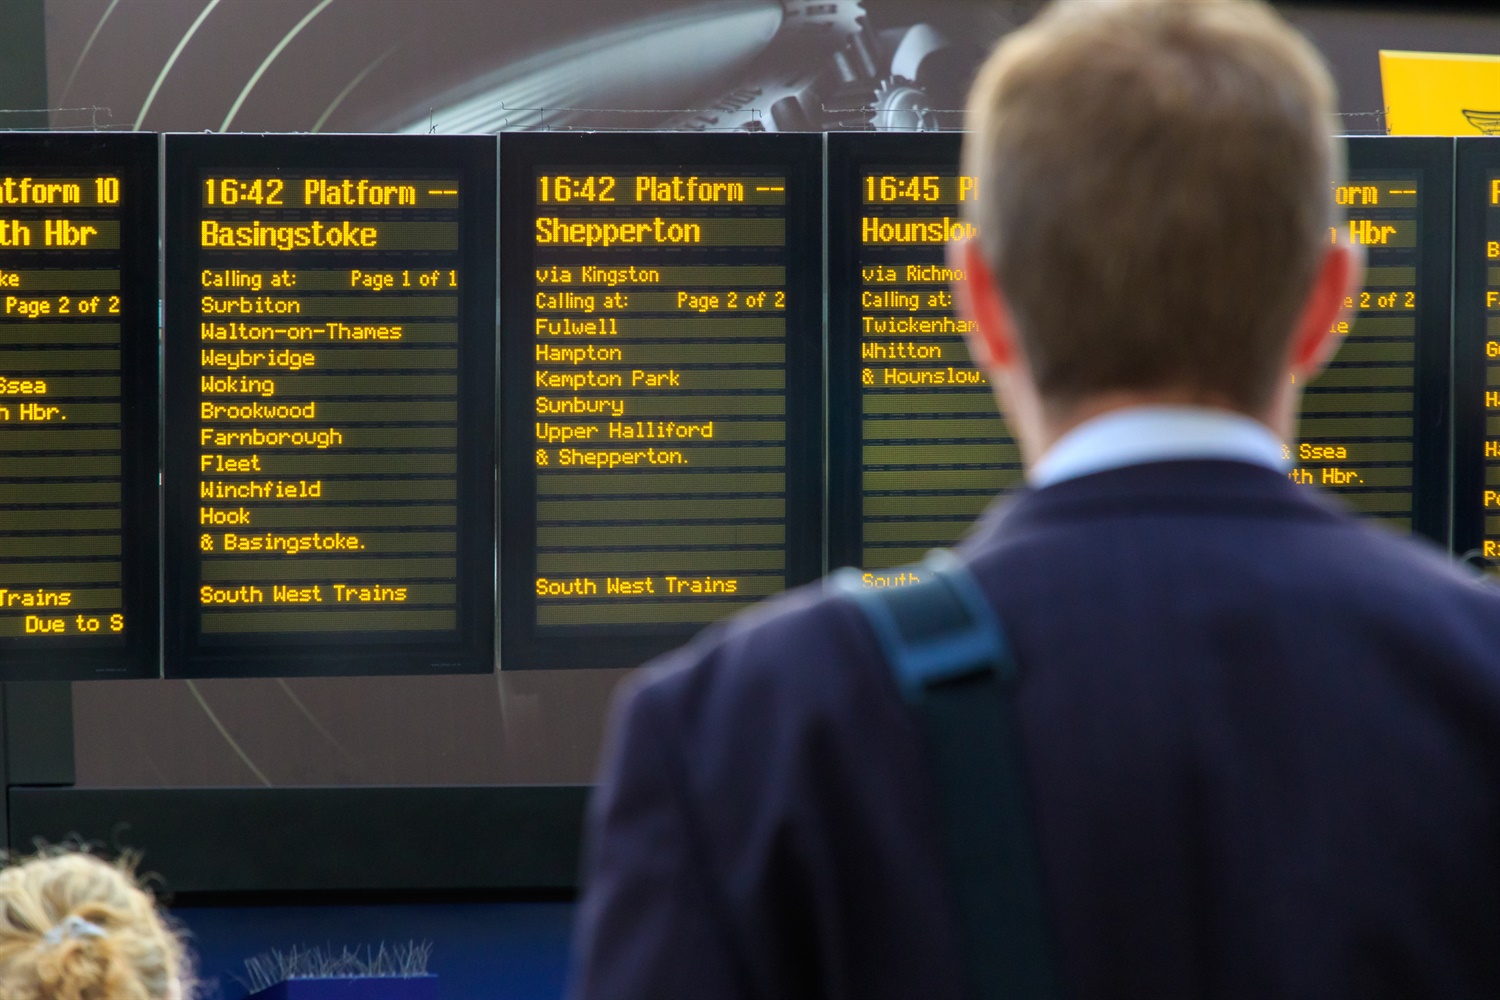 Industry must act now to keep passengers aware of ‘inaccurate’ timetables